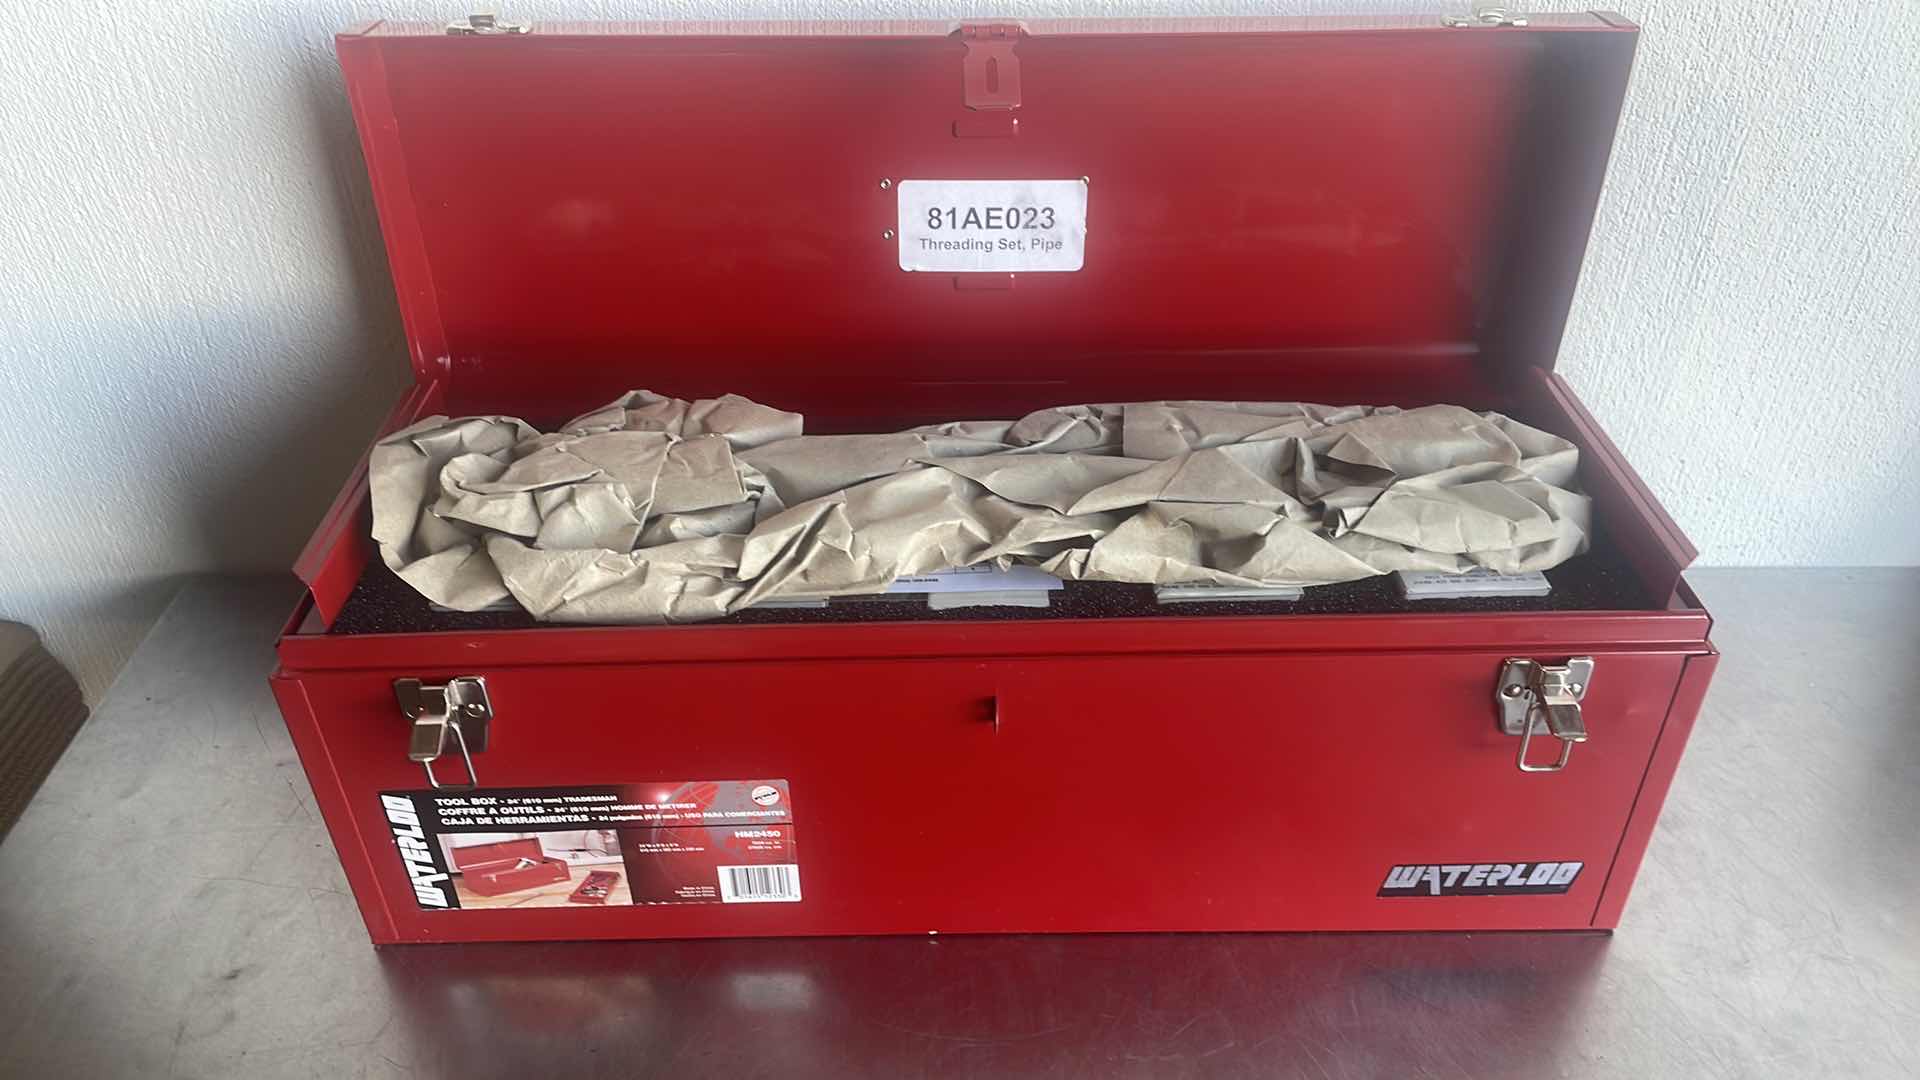 Photo 2 of WATERLOO HM2450 24” X 8” X 9” TOOLBOX WITH 81AE023 PIPE THREADING SET